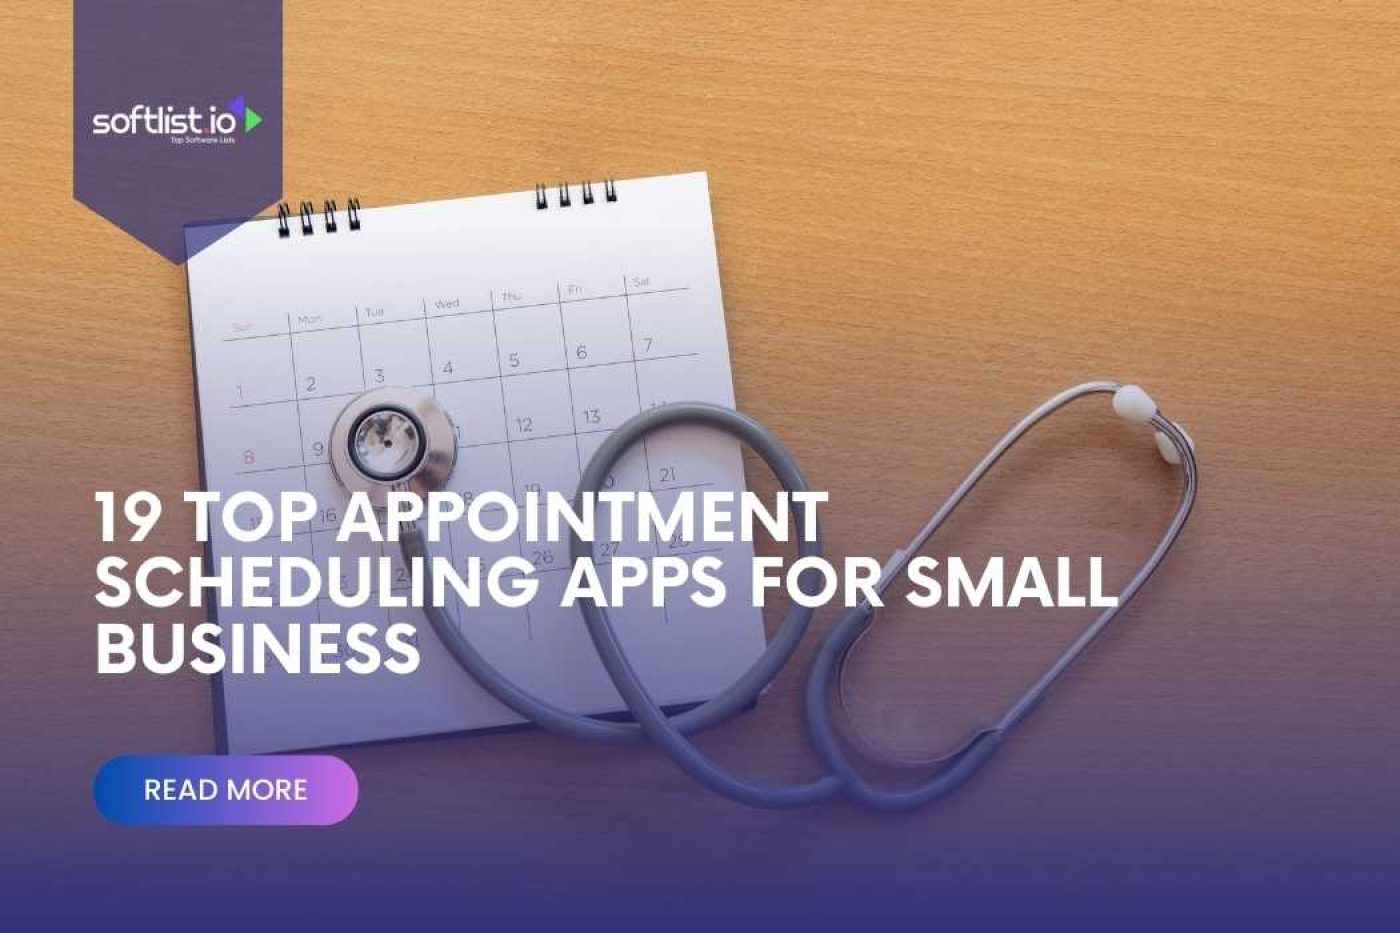 19 Top Appointment Scheduling Apps for Small Business